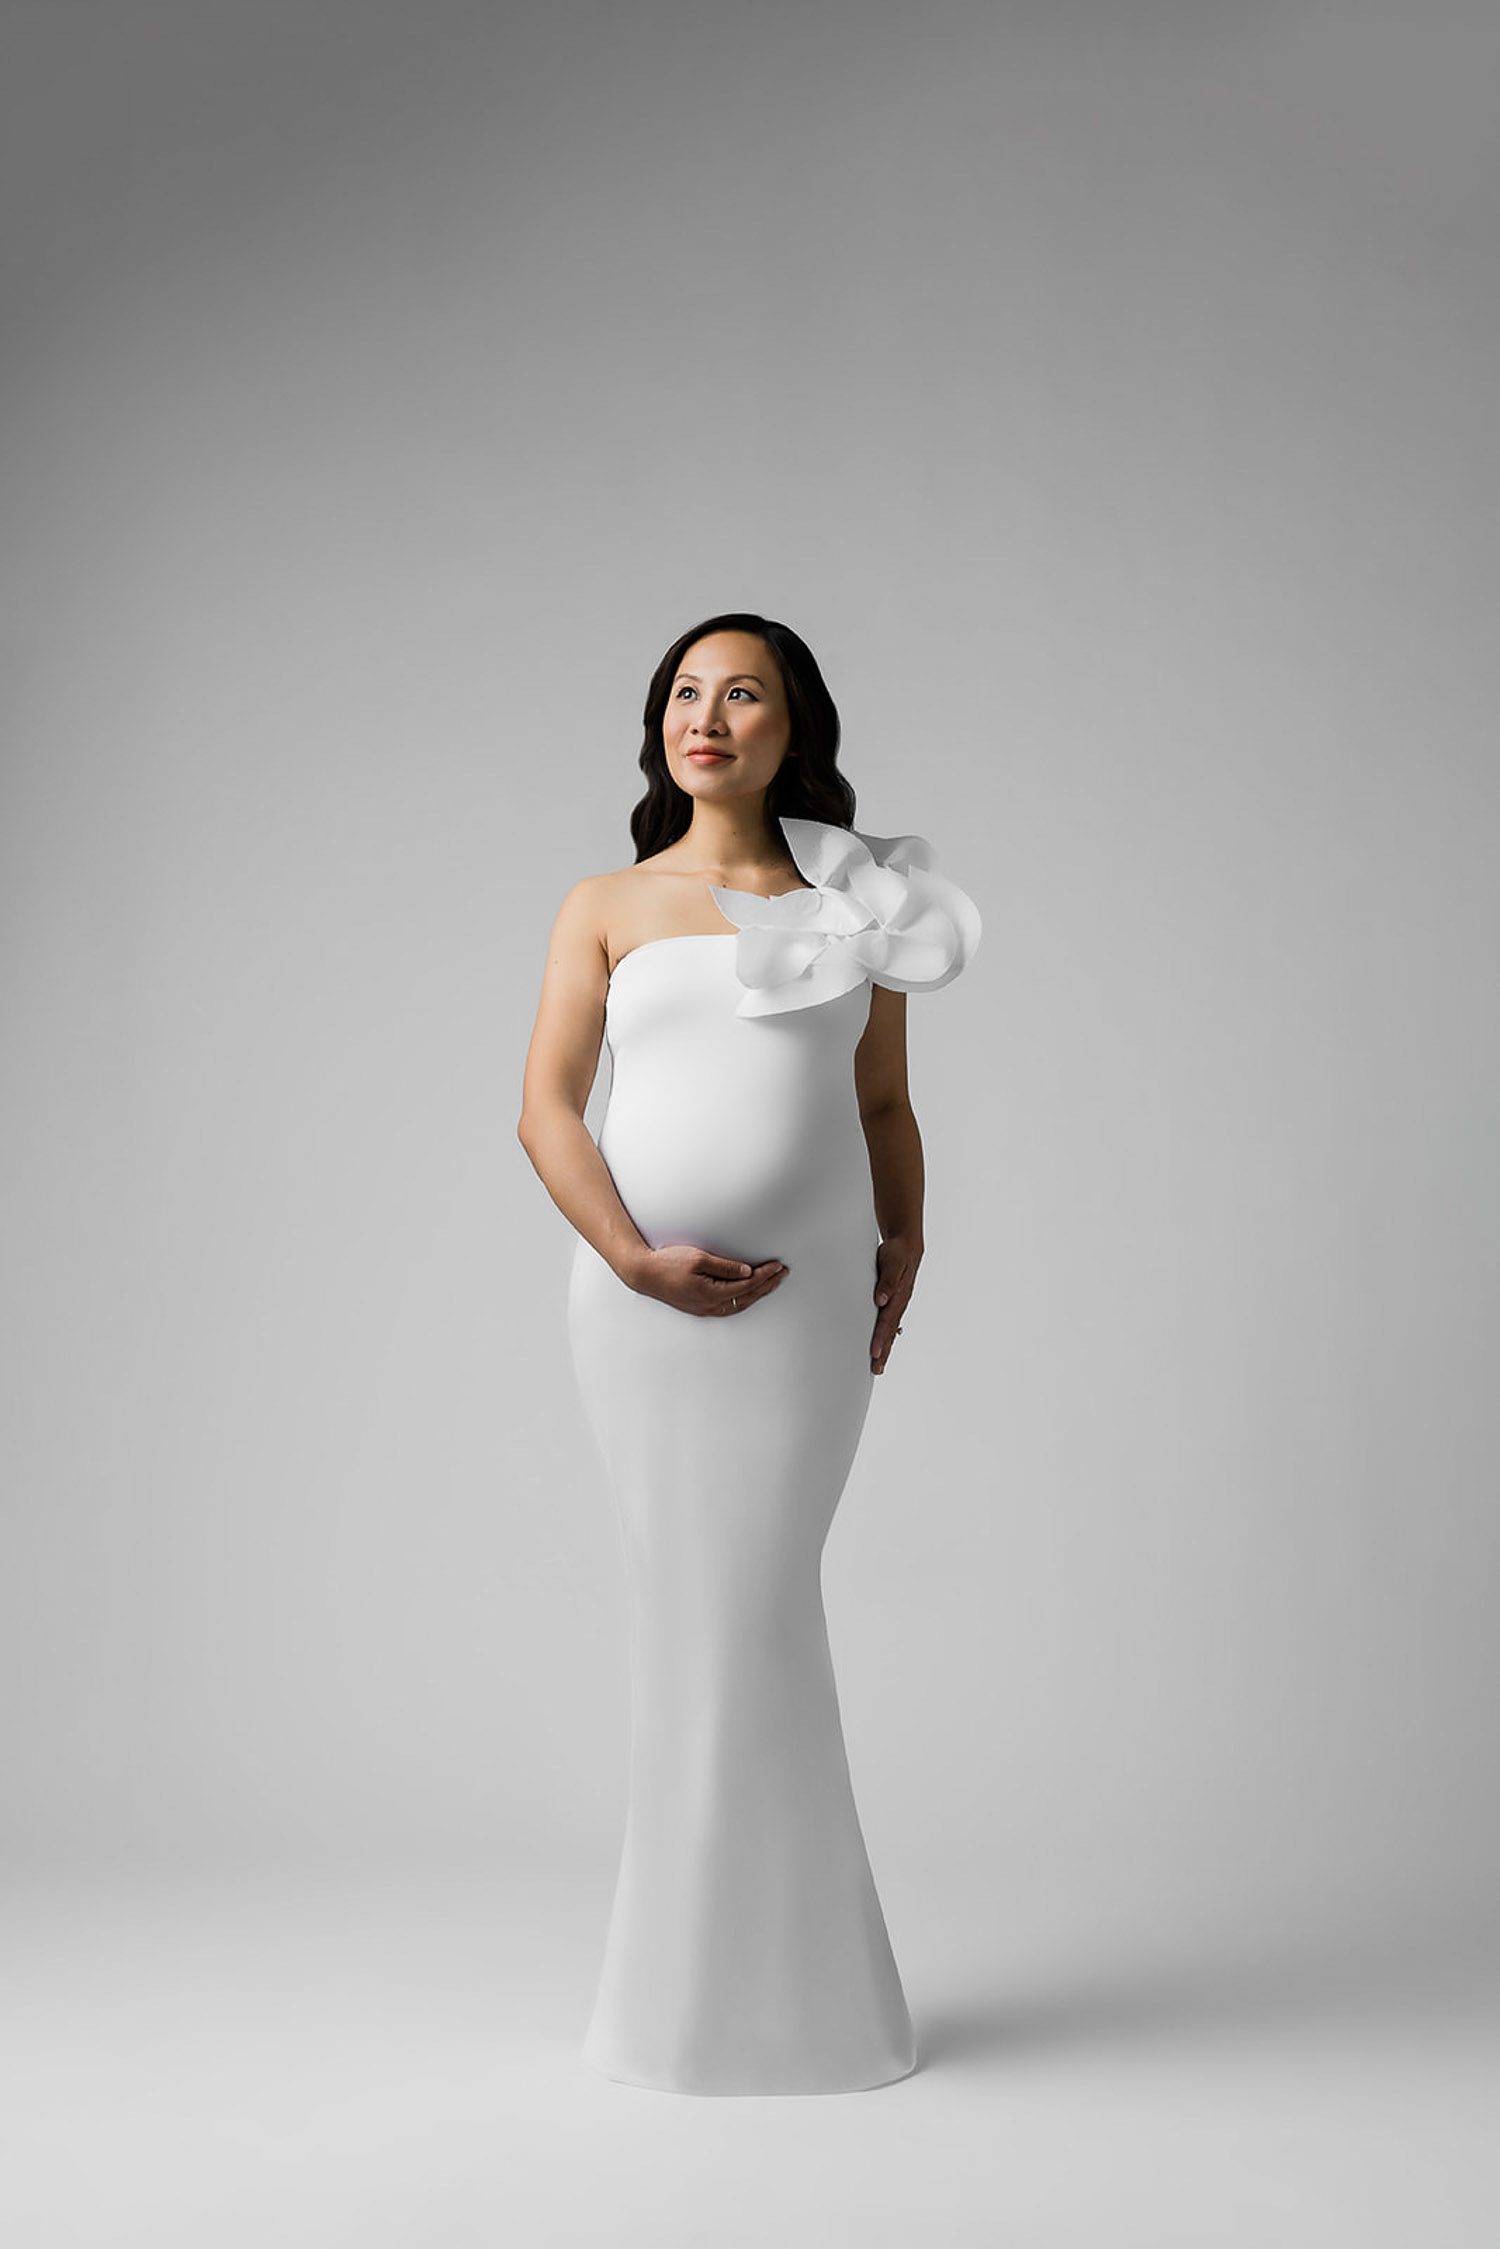 Editorial maternity photography